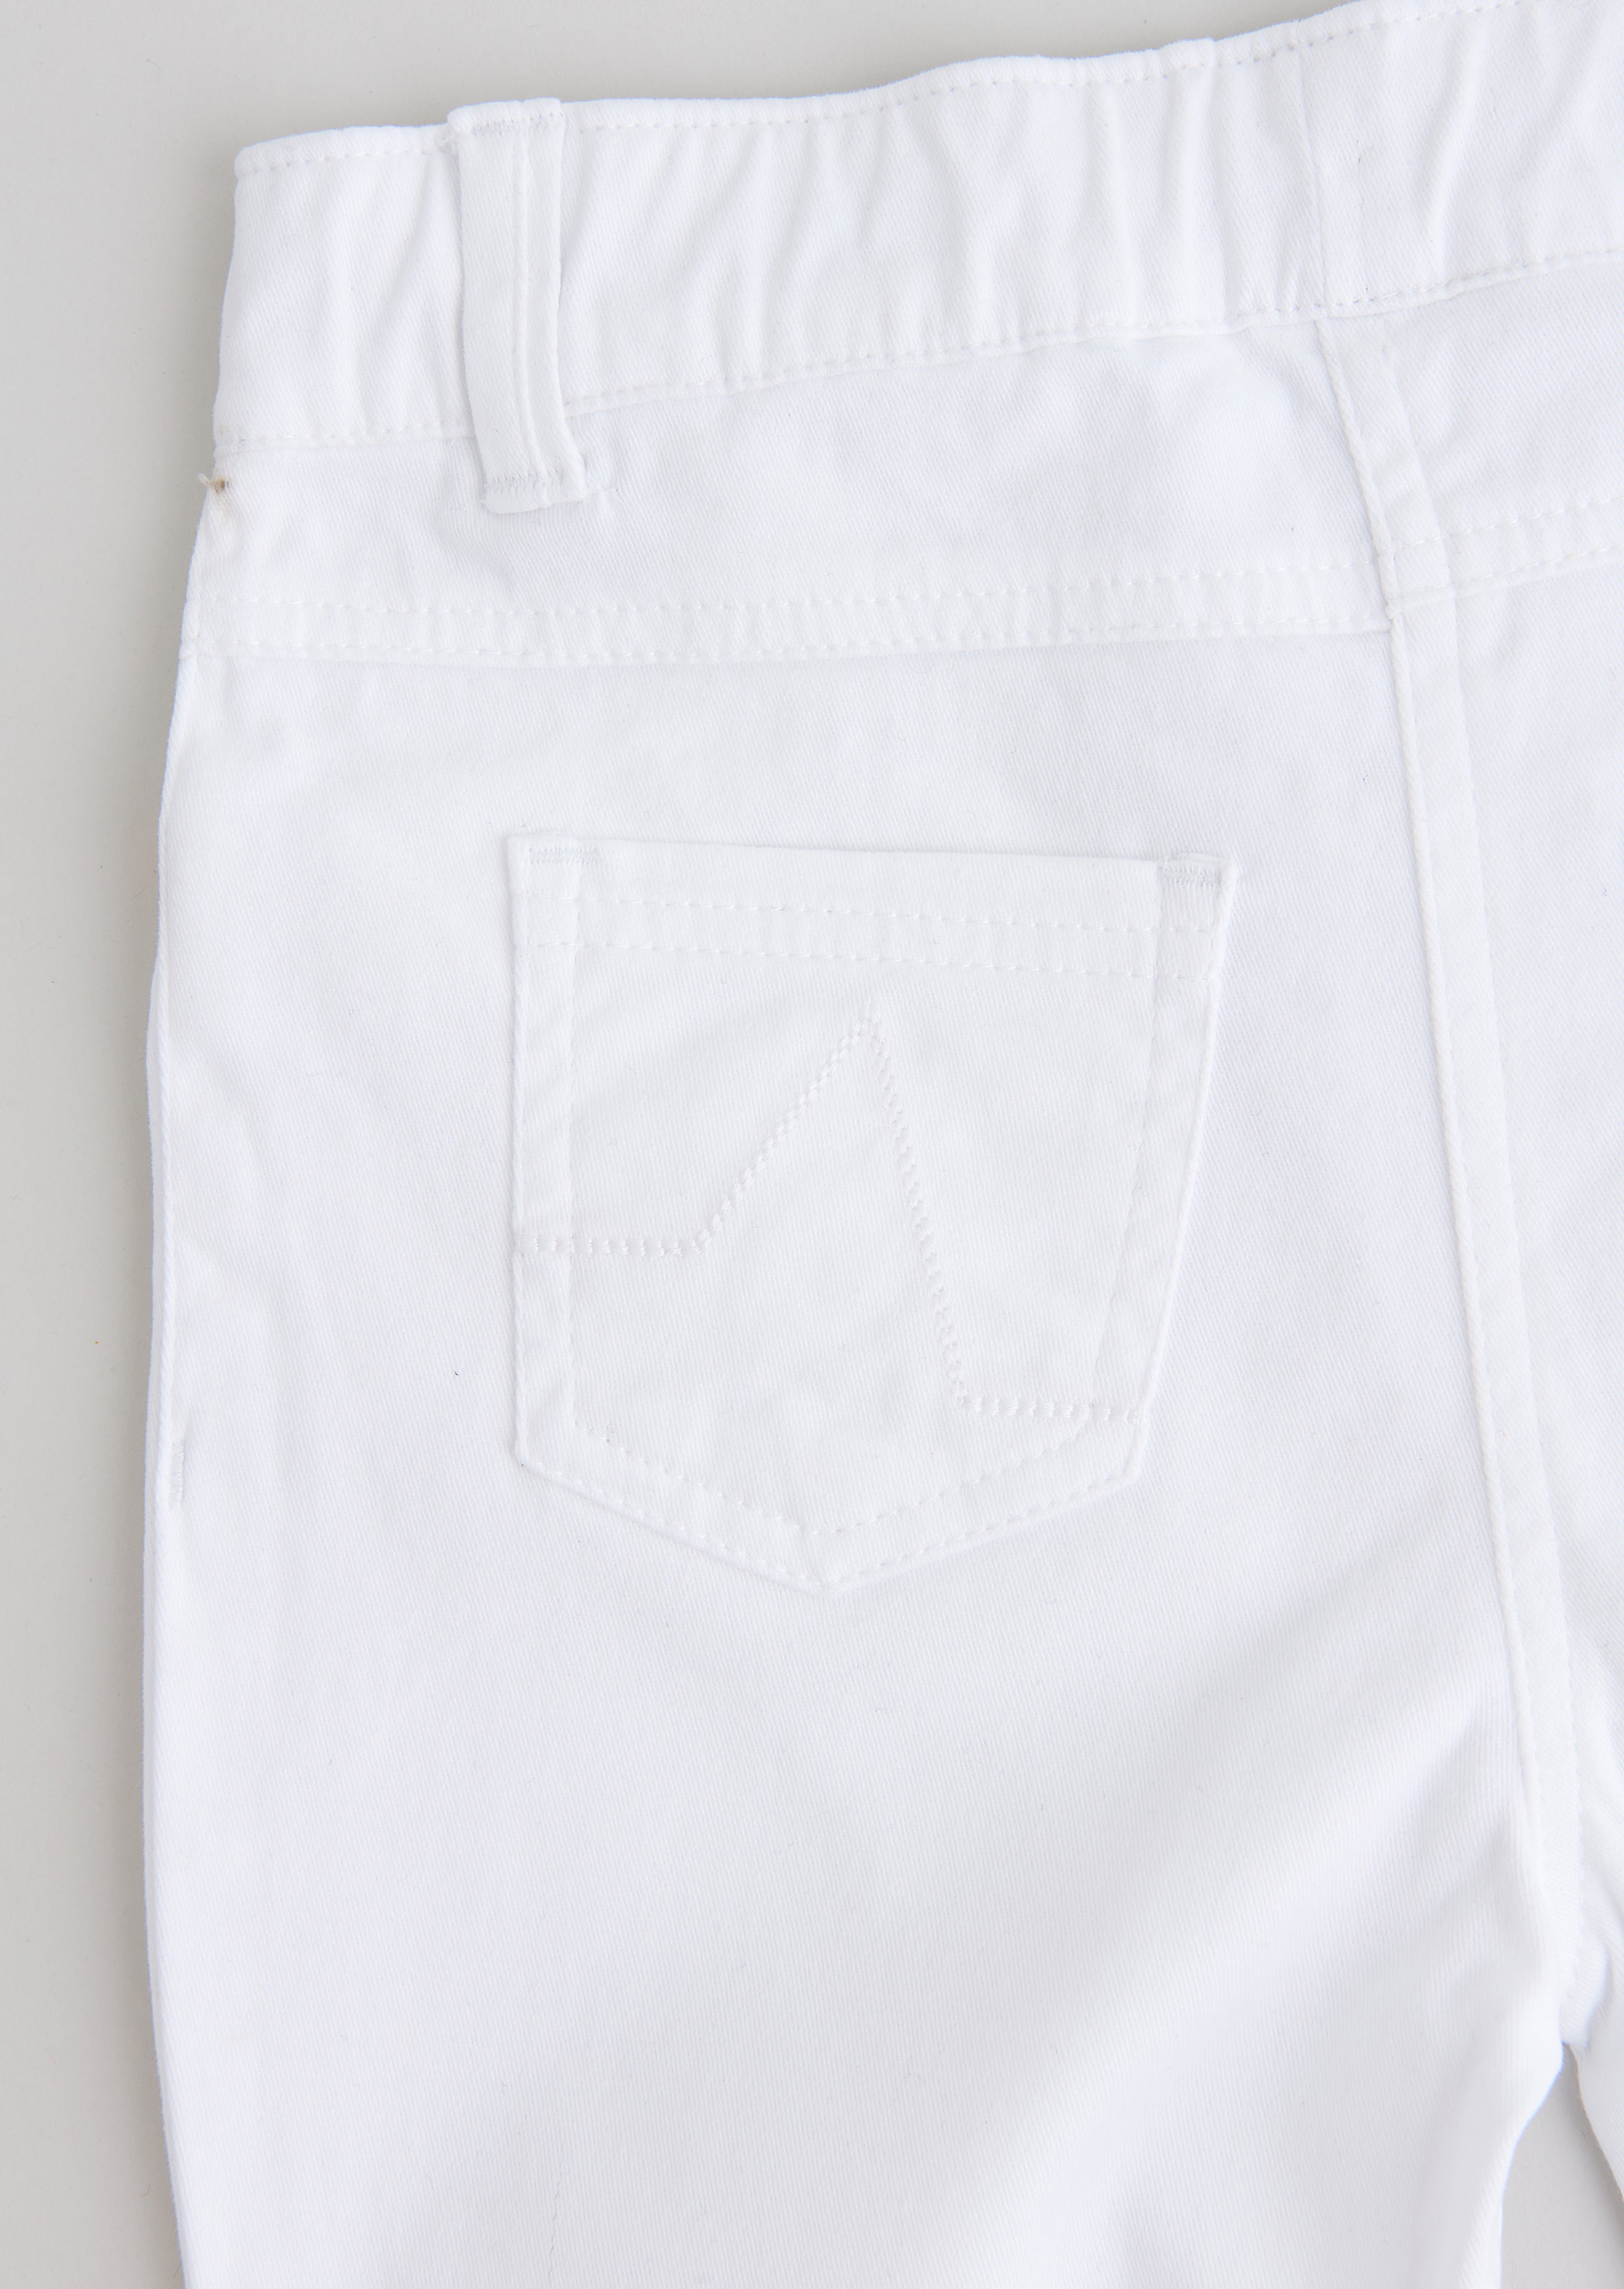 Girls Solid White Woven Jeggings